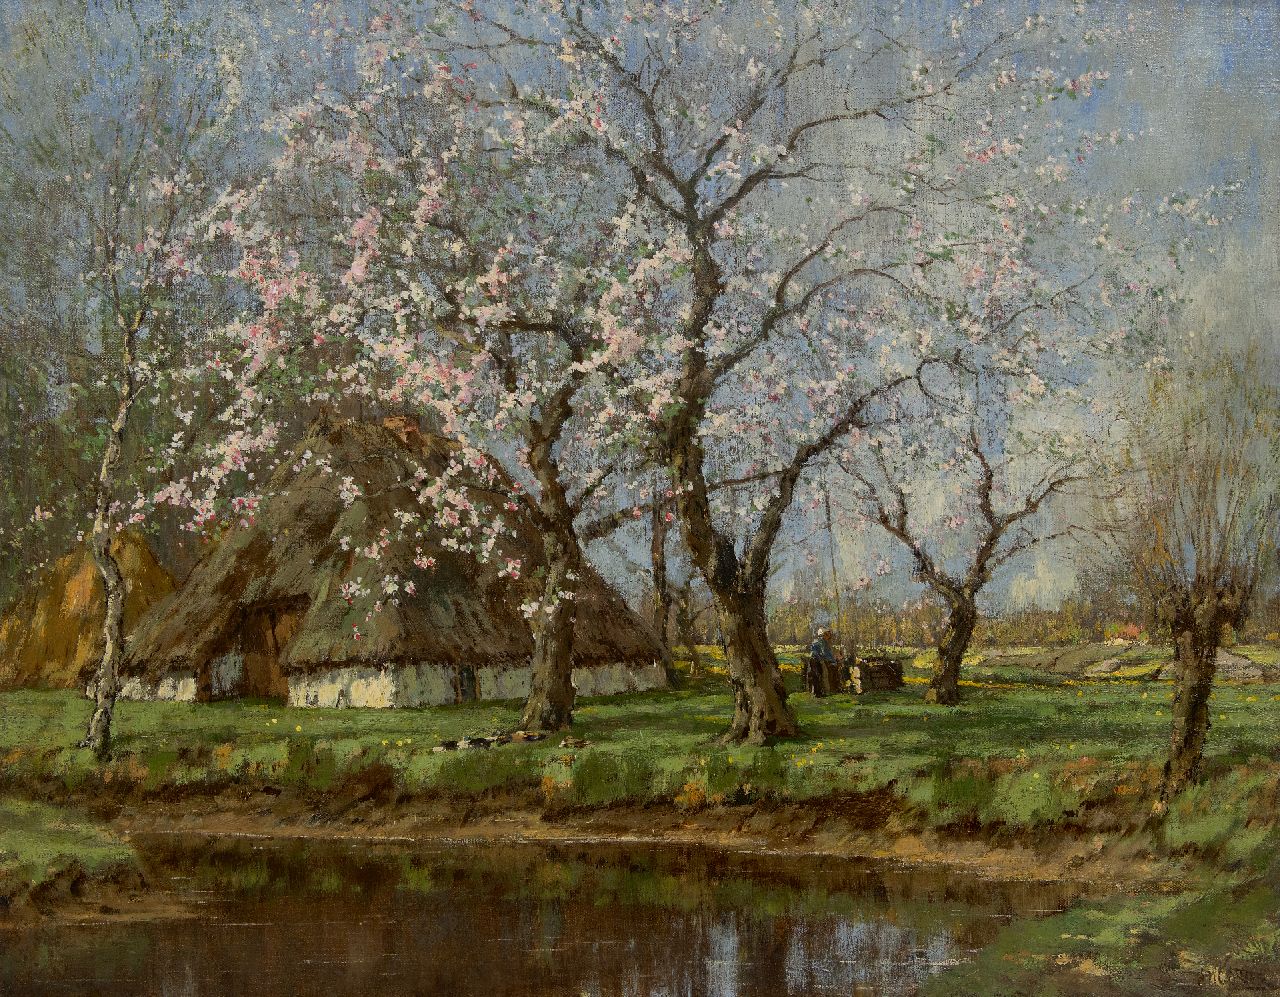 Gorter A.M.  | 'Arnold' Marc Gorter | Paintings offered for sale | Spring landscape with a farm, oil on canvas 62.6 x 79.4 cm, signed l.r.